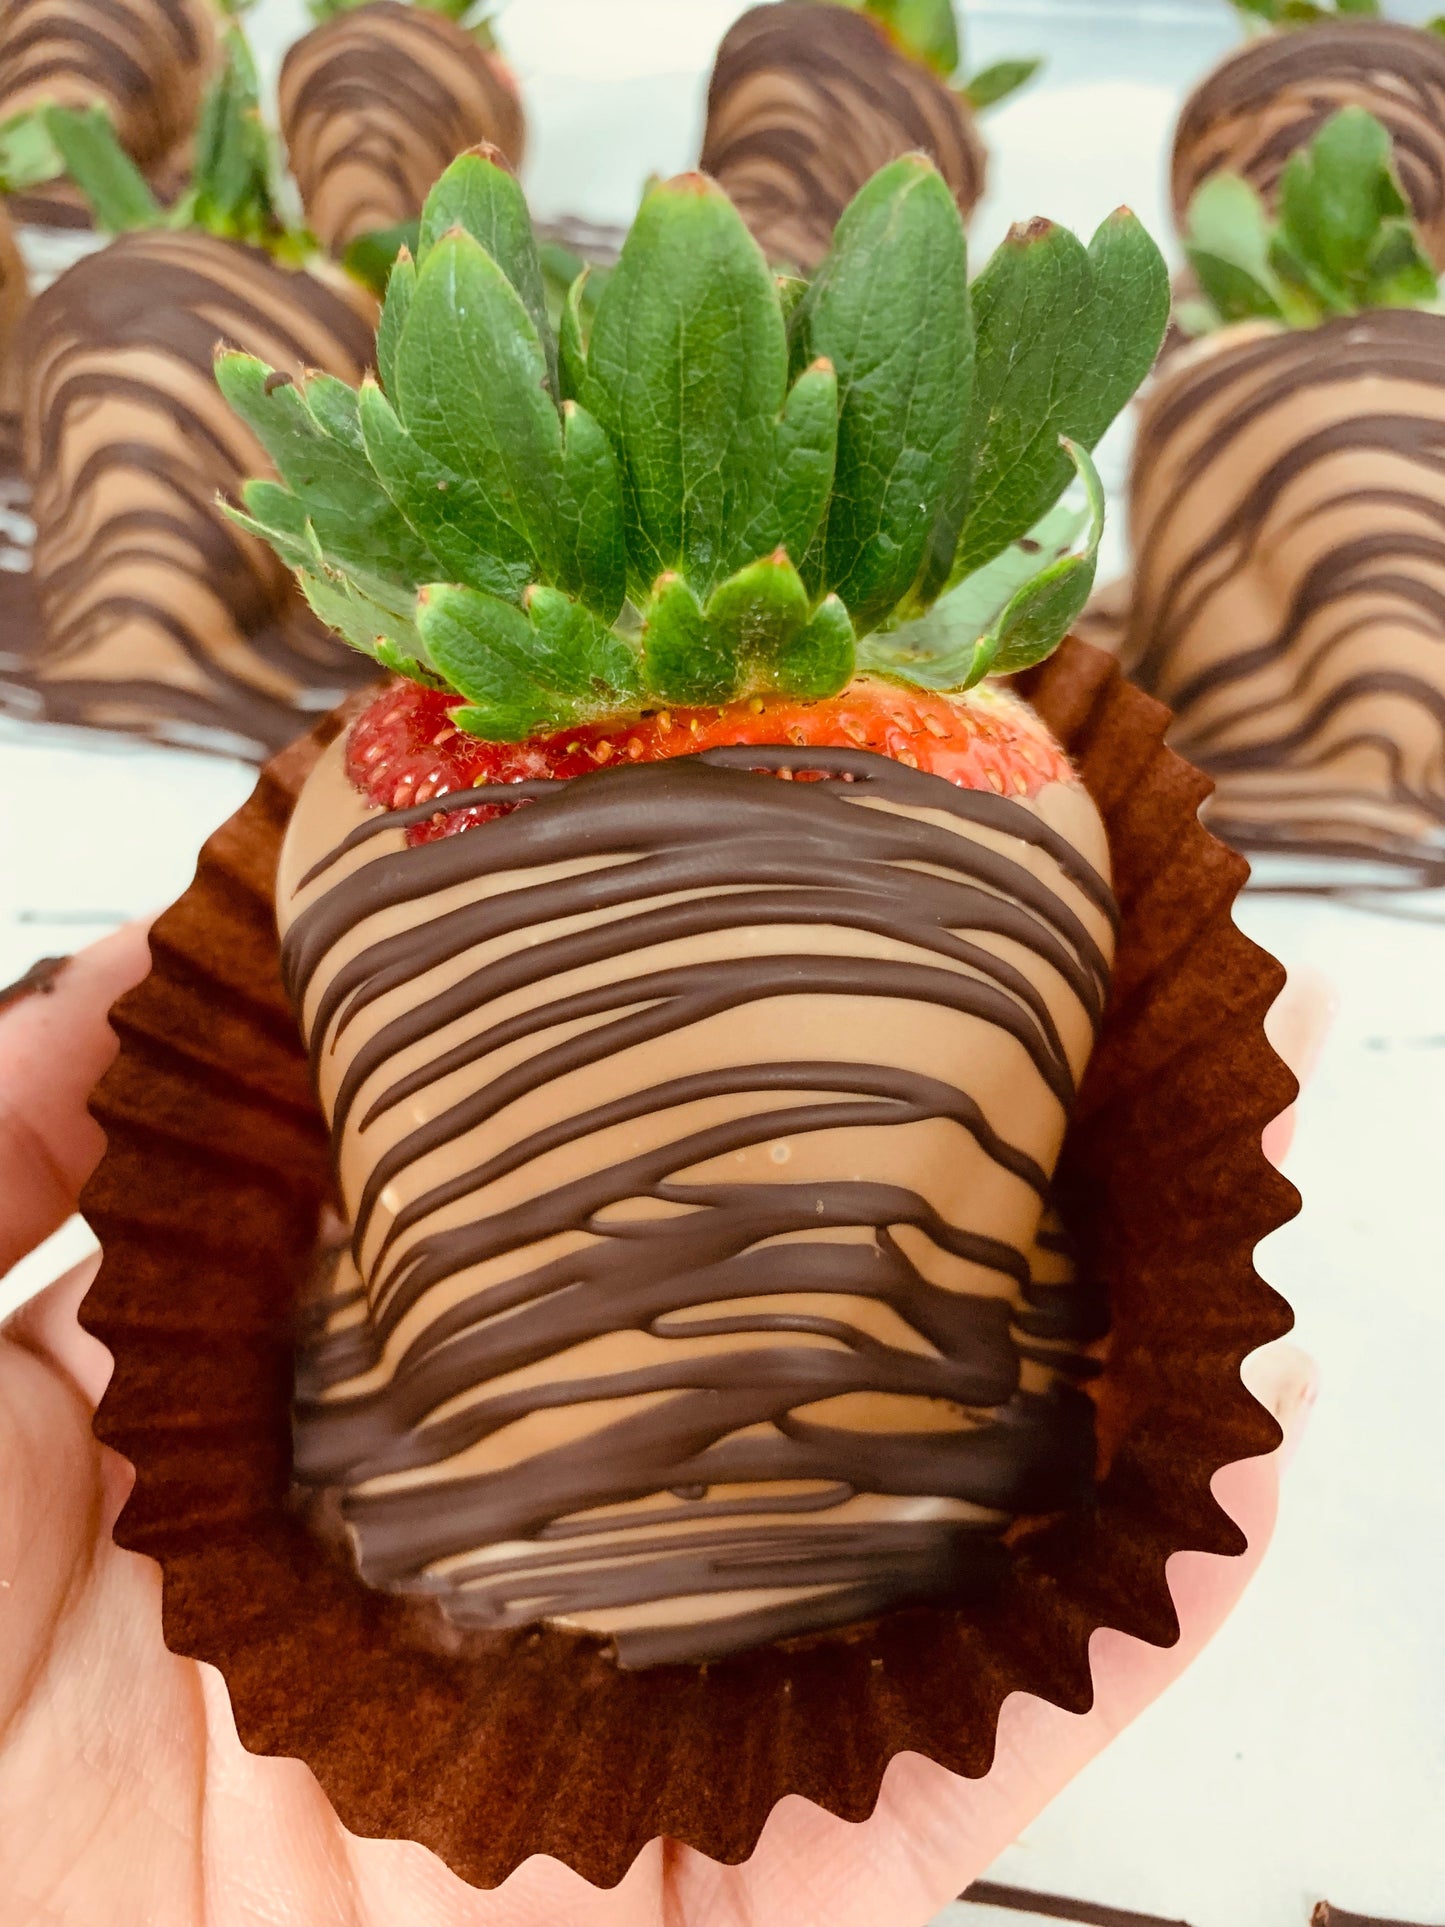 PREORDER - 6 Chocolate Covered Strawberries